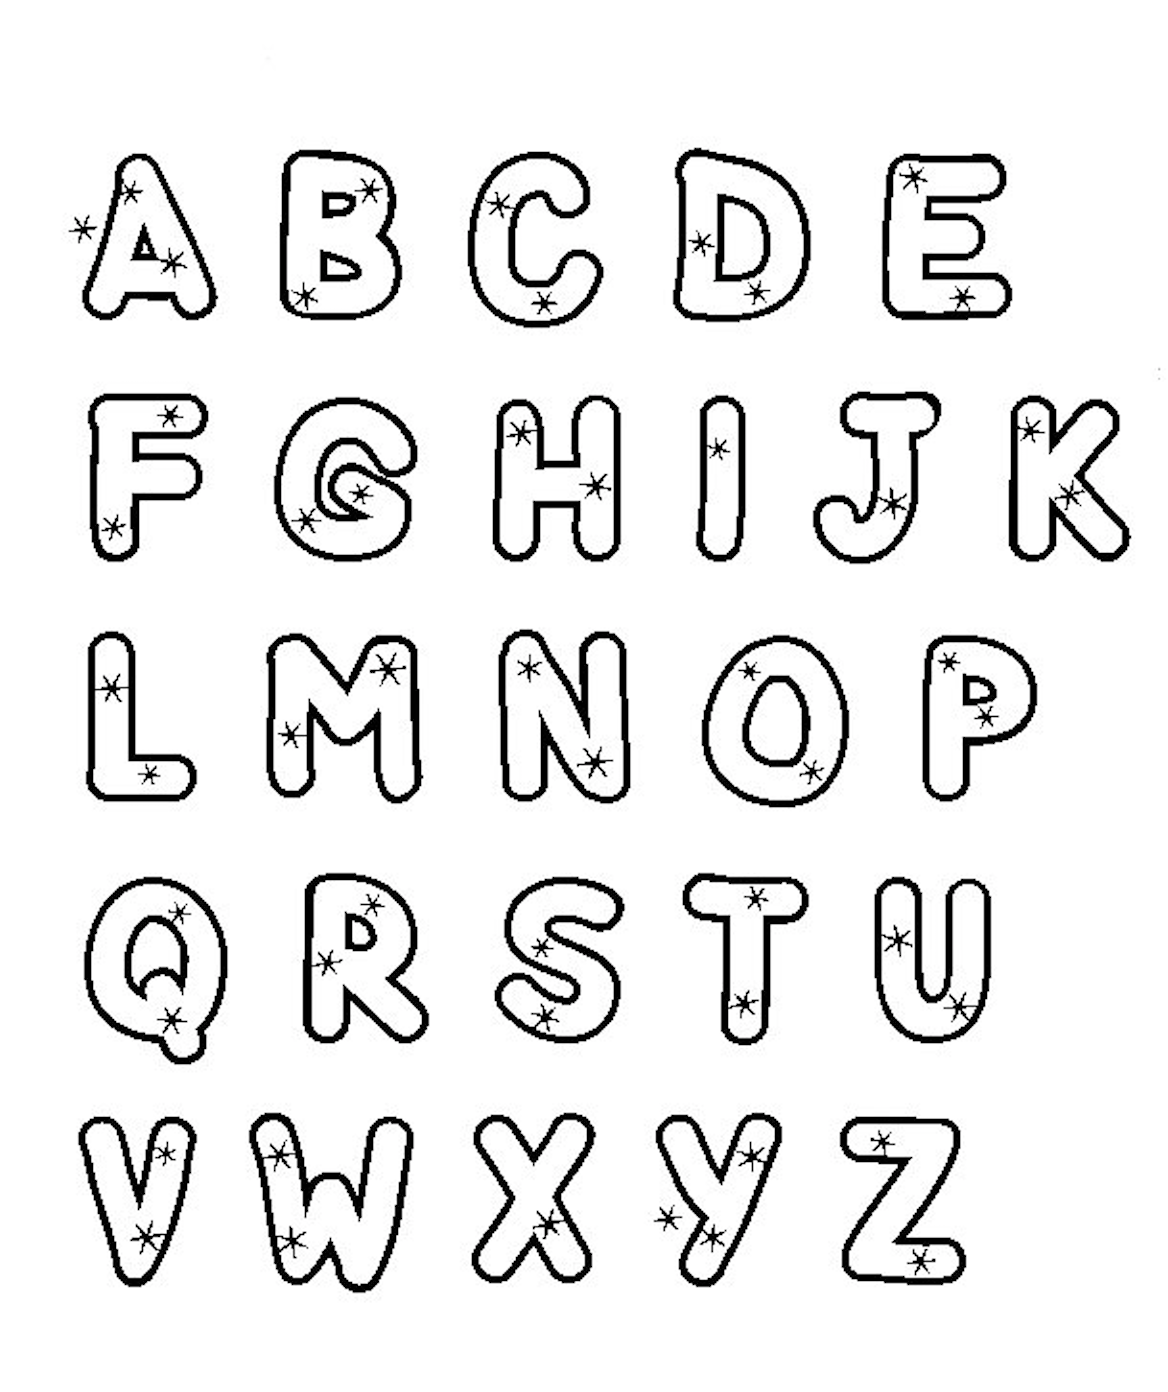 printable-color-the-alphabet-worksheets-printable-alphabet-worksheets